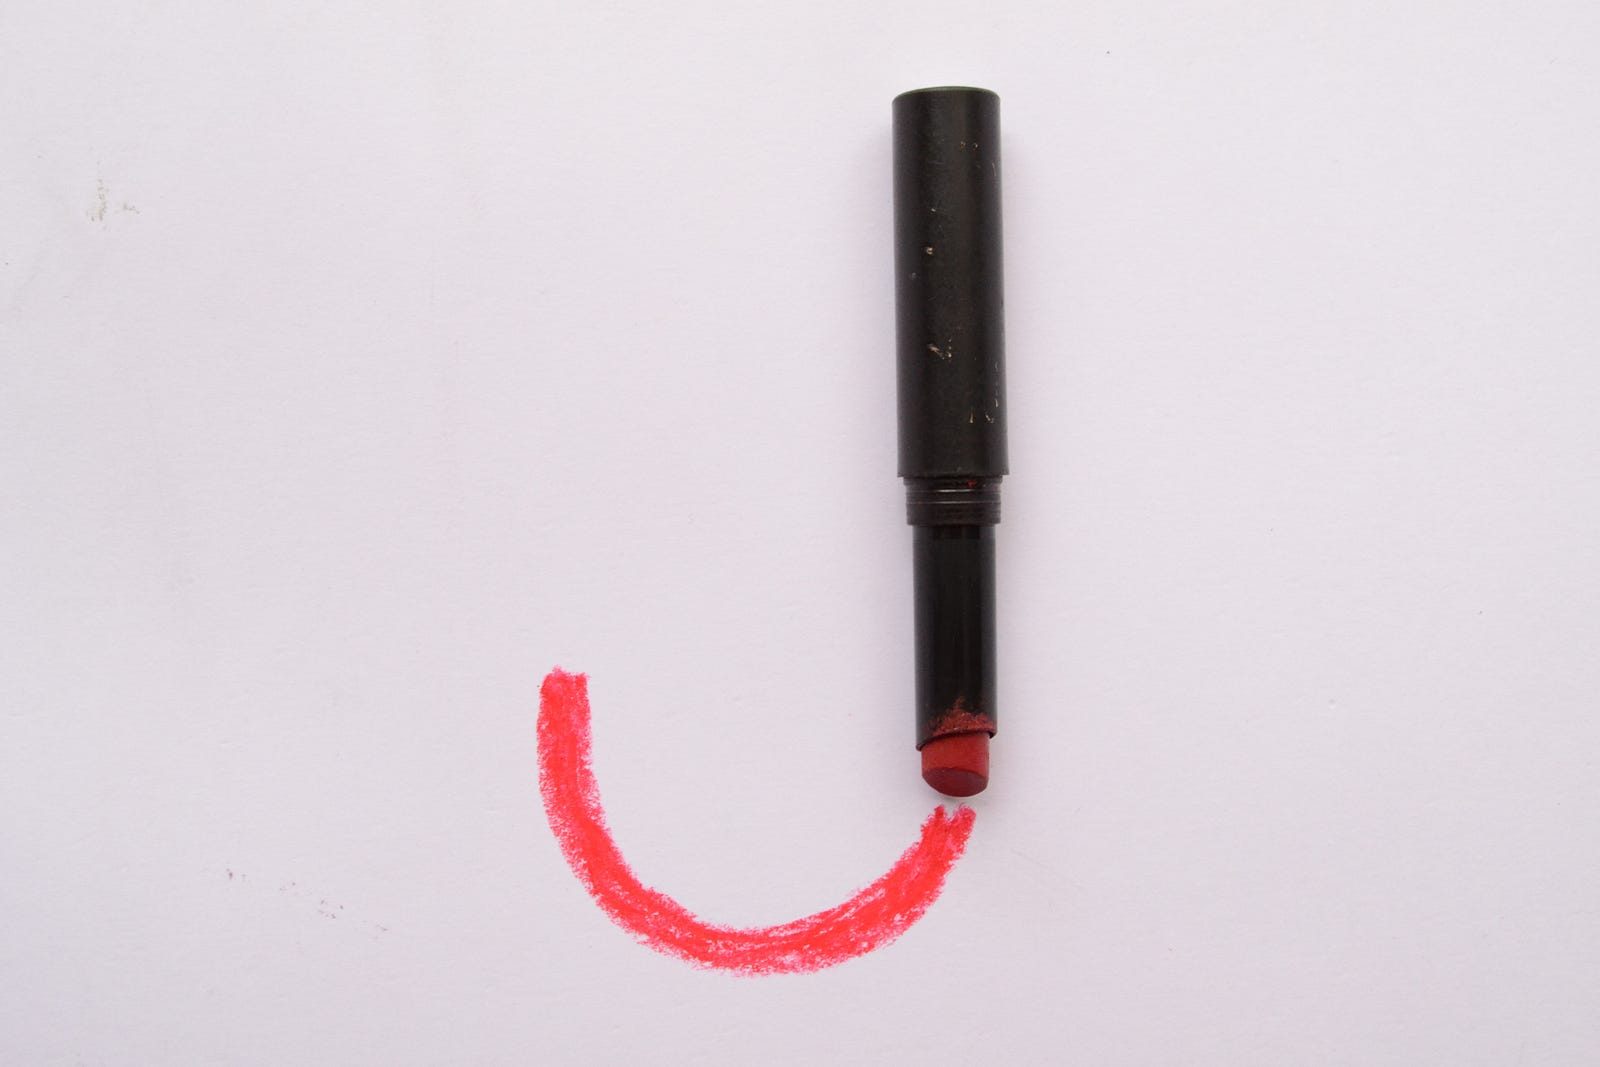 A marker forms the vertical portion of a “J.” A red curl of ink forms the lower portion of the letter. You may have heard that alcohol consumption has a J-shaped correlation with cardiovascular health.